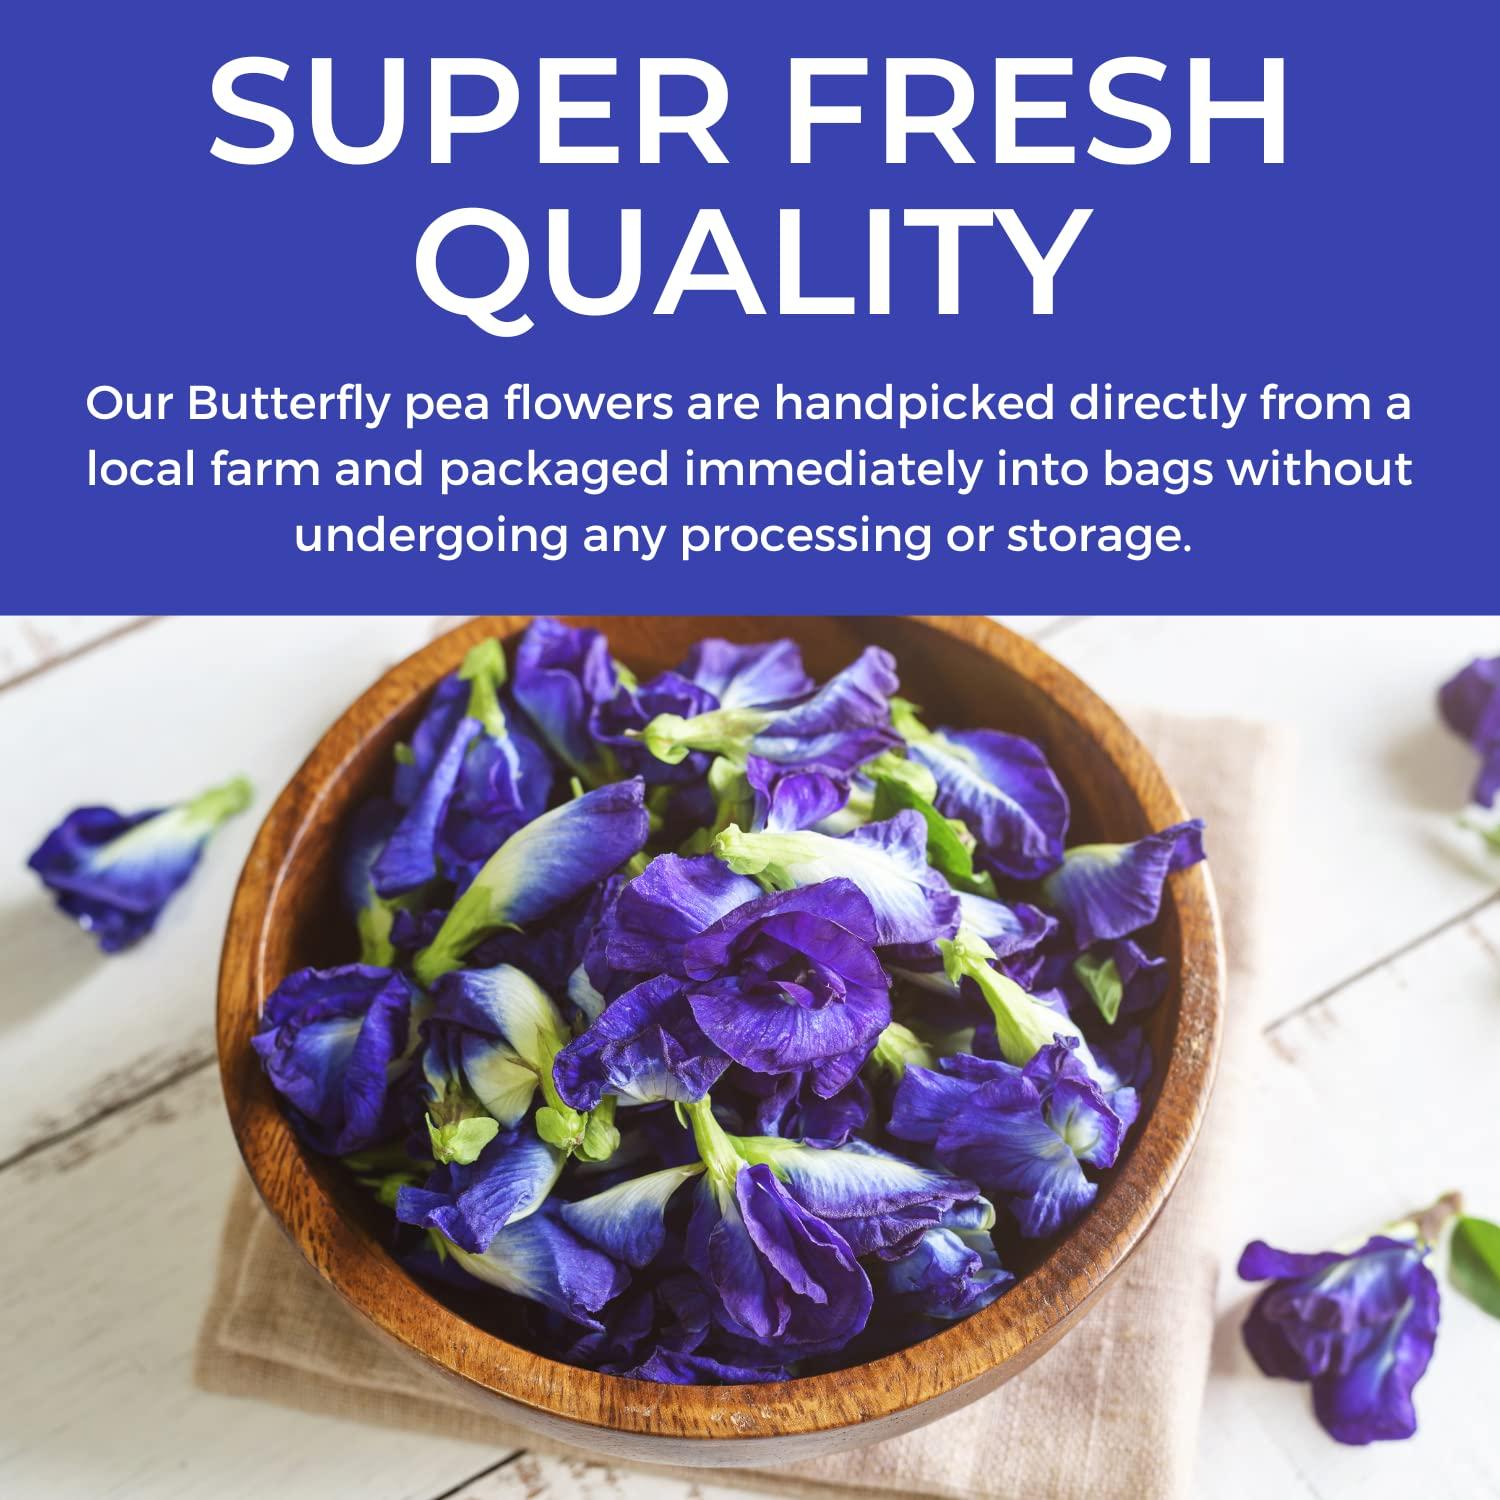 7 Amazing Health Benefits Of Butterfly Pea Flower - Tea and I®